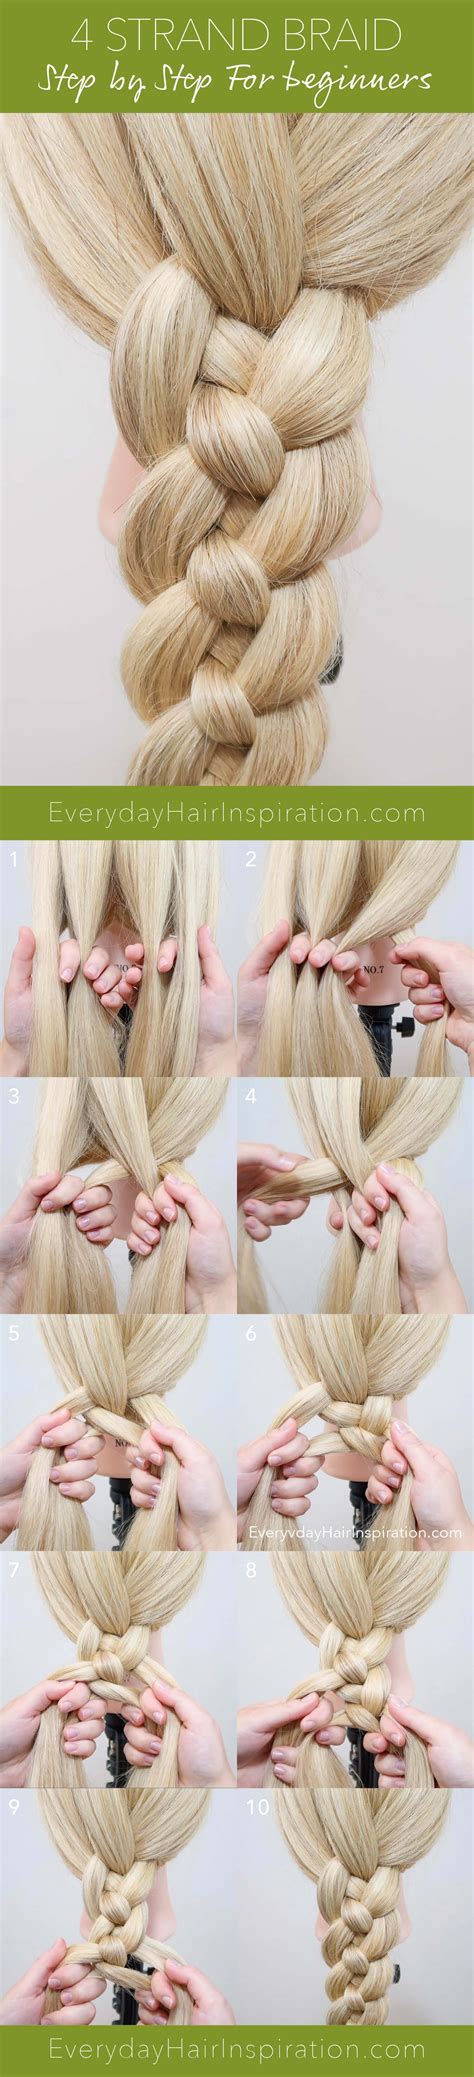 How to braid with four strands of hair. How To 4 Strand Braid - Everyday Hair inspiration - BRAIDED STYLES